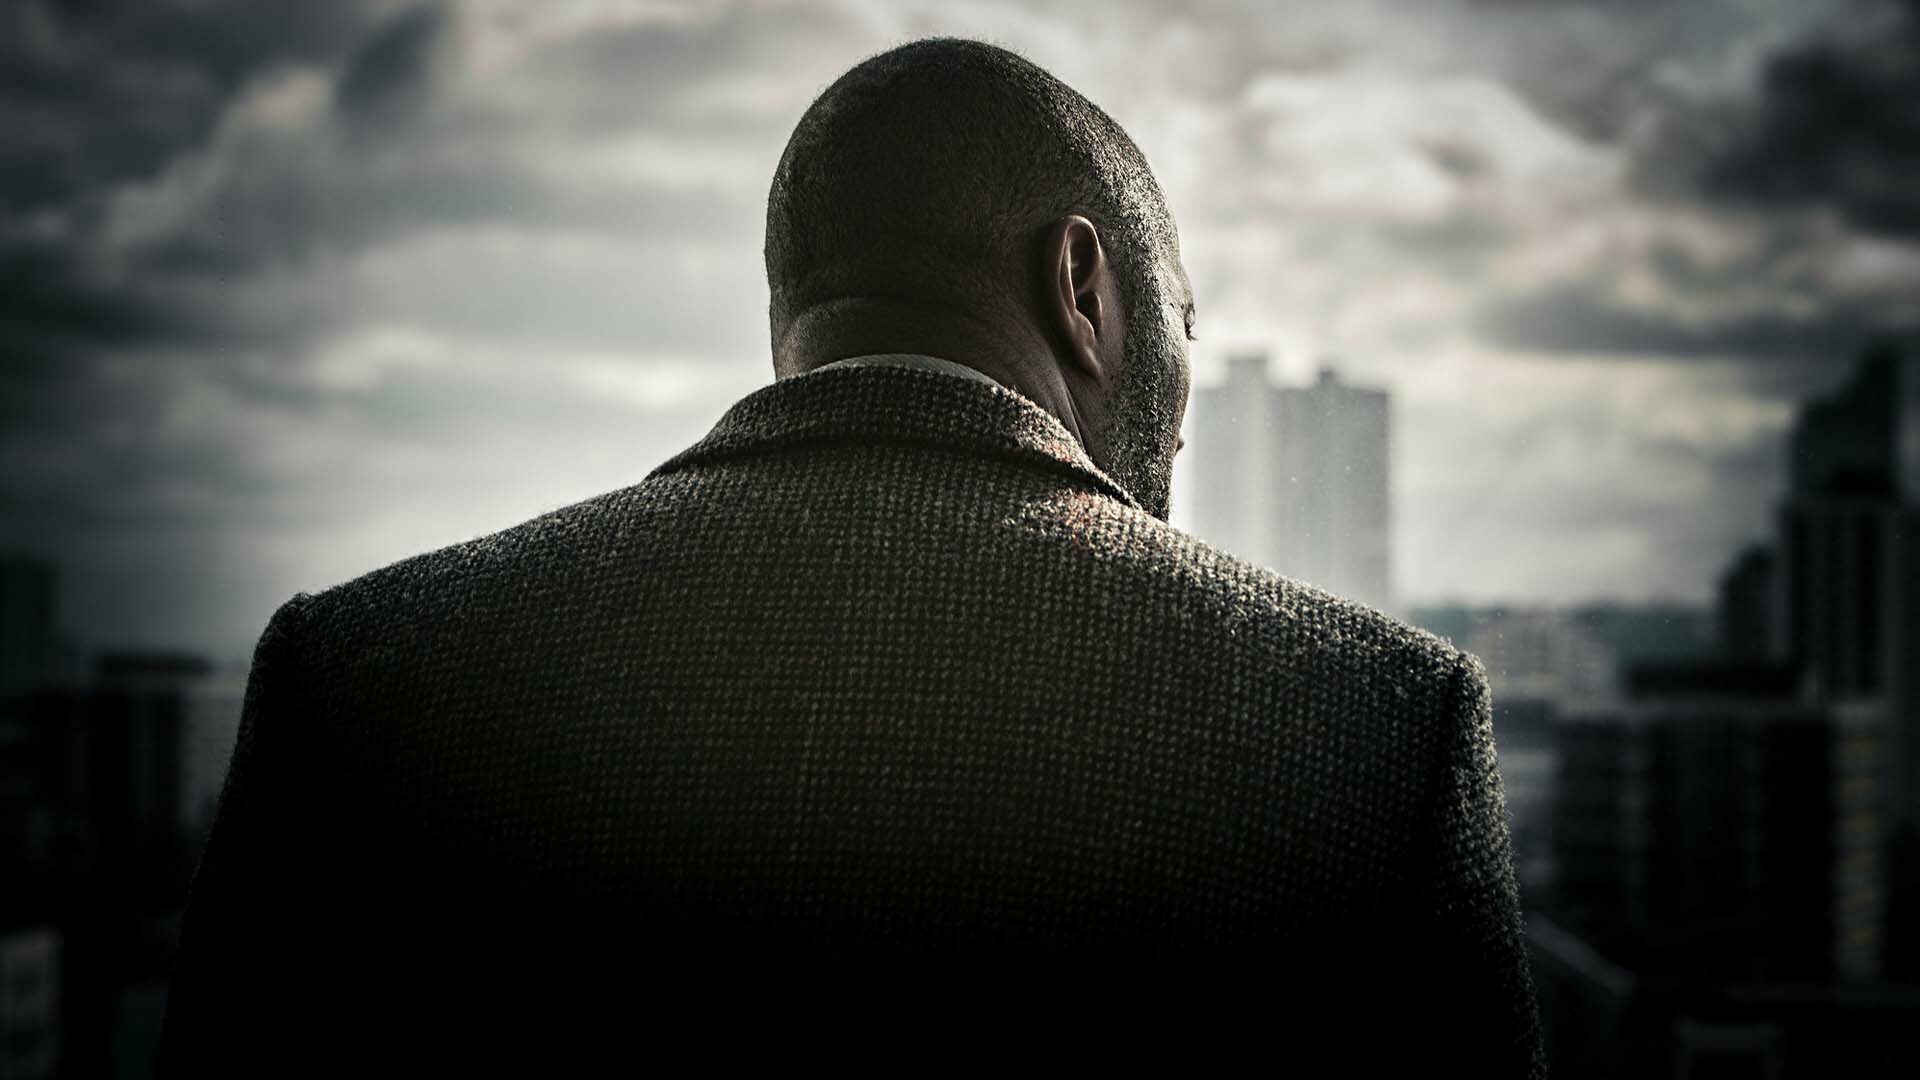 Luther (TV series): A two-episode fourth season was broadcast in December 2015. 1920x1080 Full HD Wallpaper.